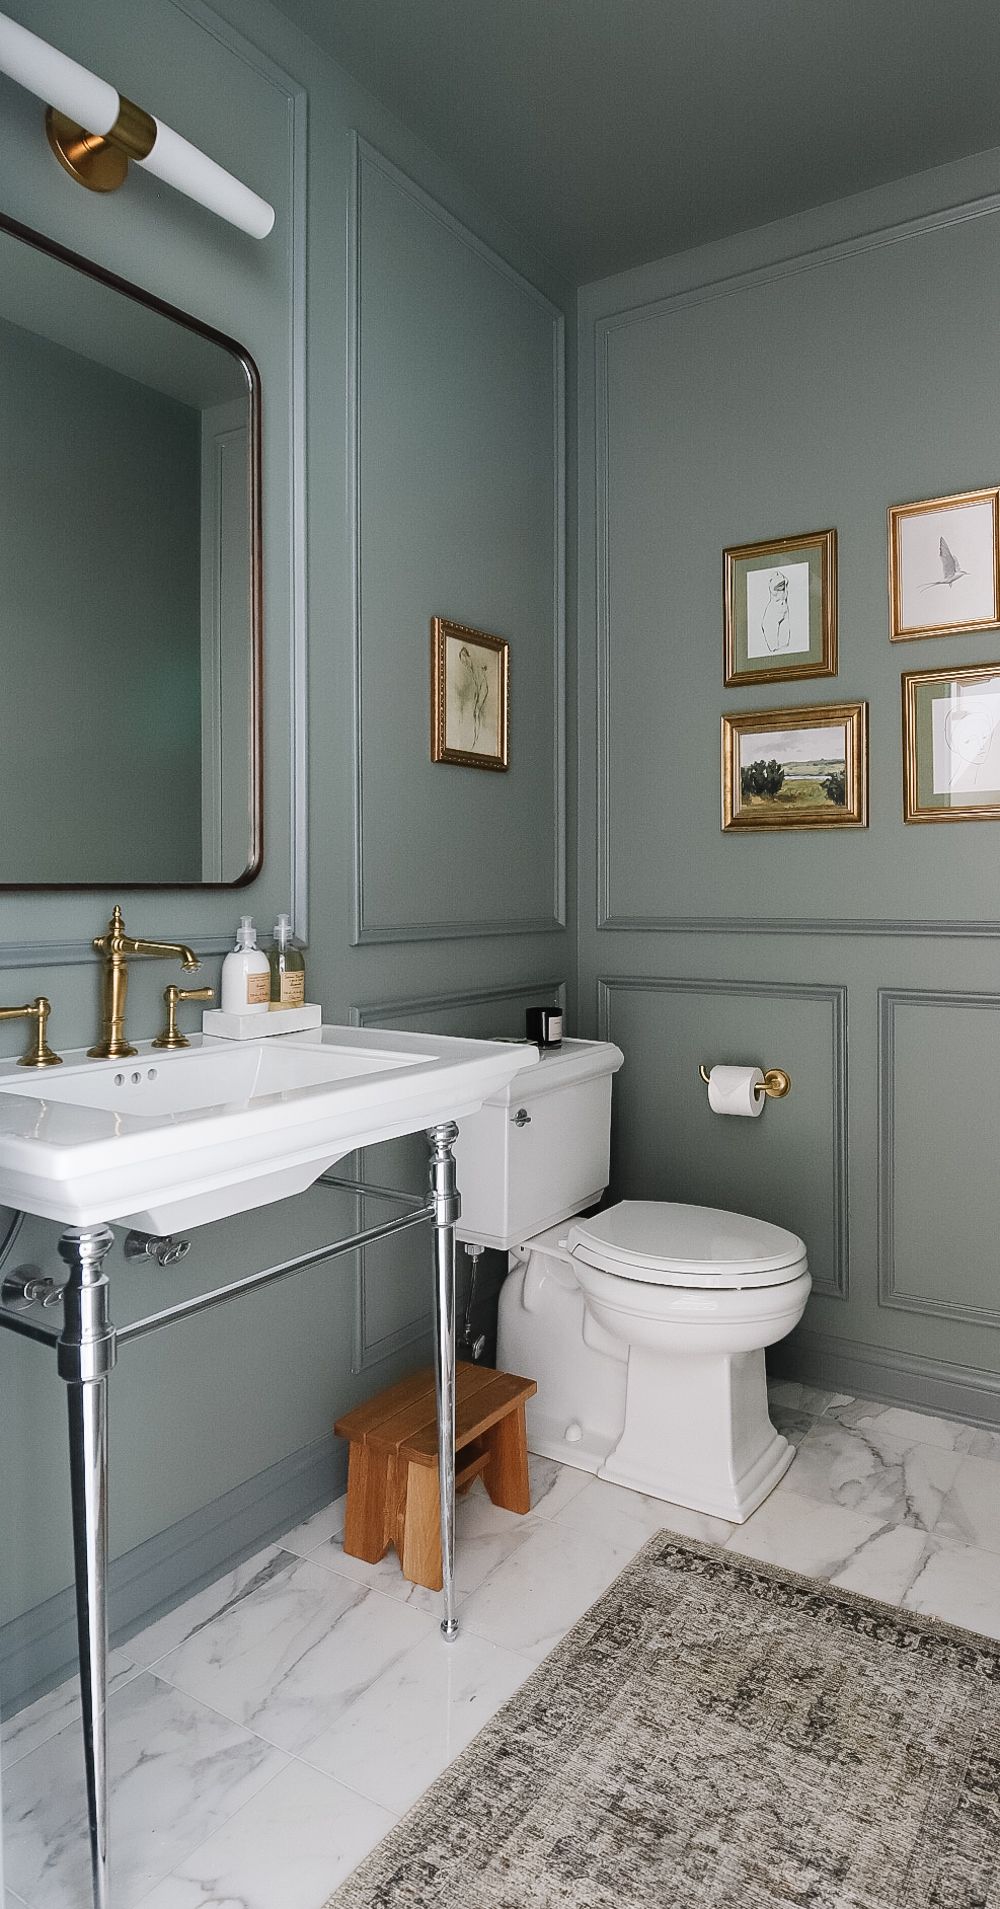 Bathroom Colors: Choosing the Perfect Palette for Your Oasis